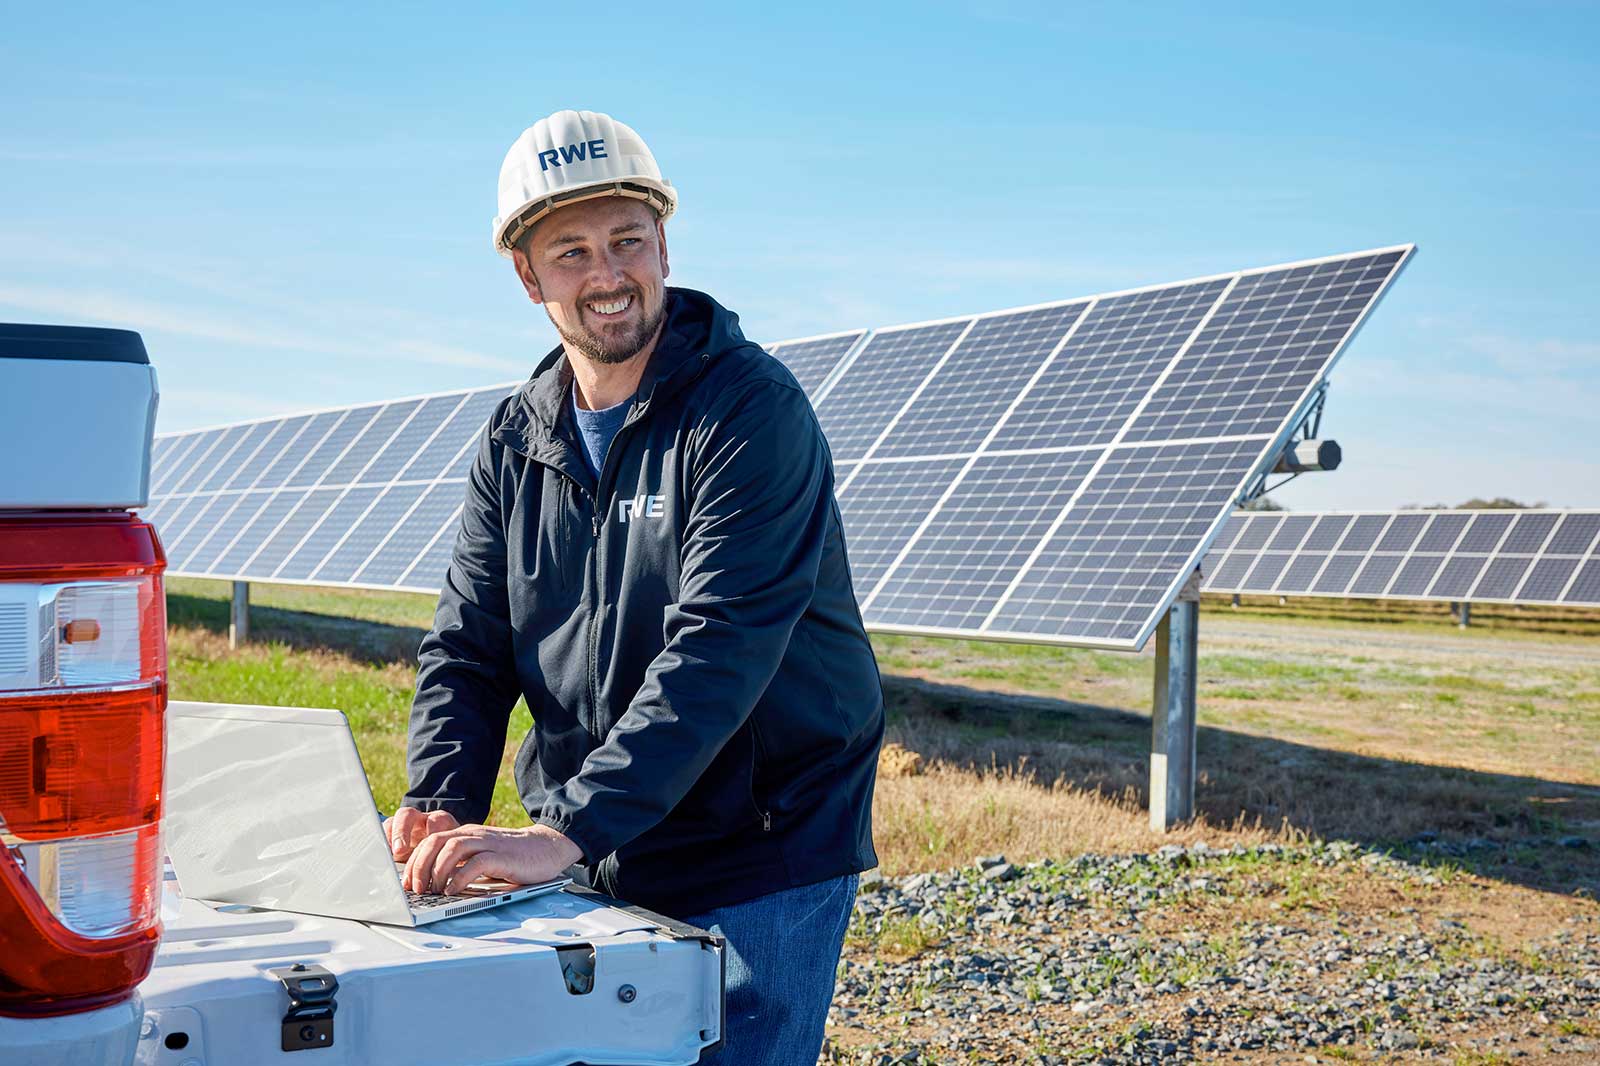 An RWE employee stands at his white pick-up truck and uses a laptop. In the background are solar panels on a meadow.